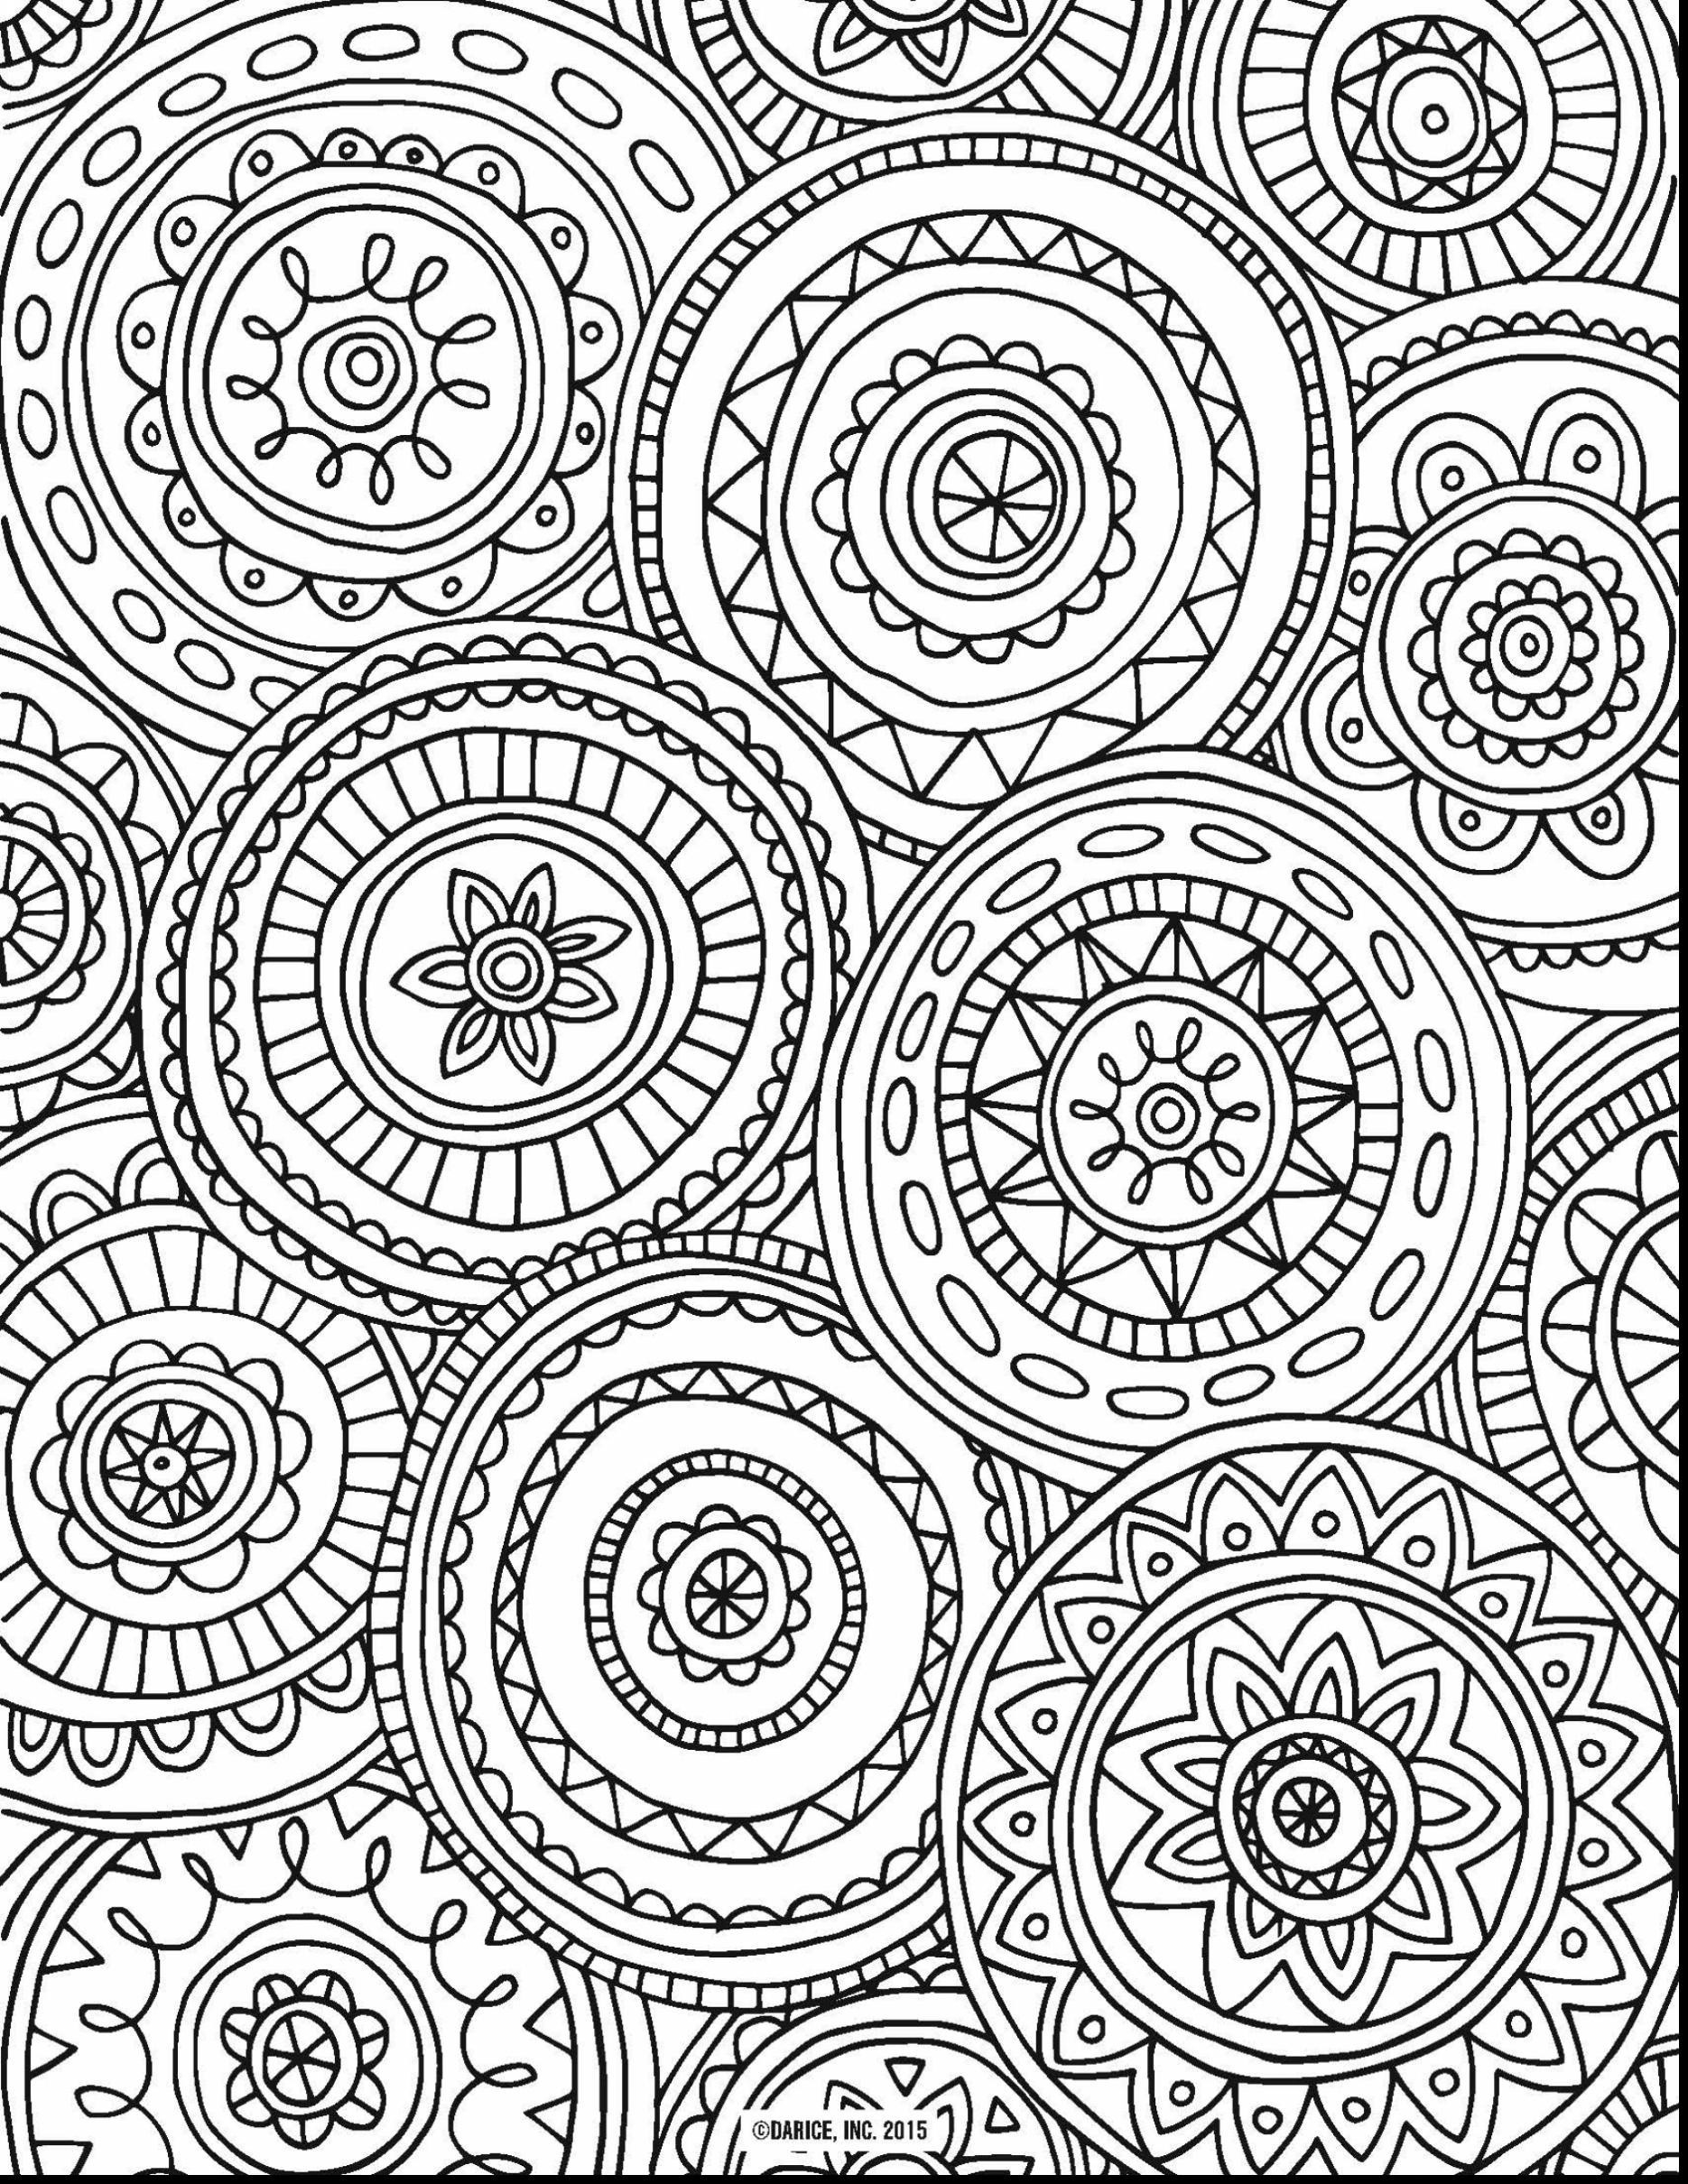 Best Of Free Printable Mandala Coloring Pages For Adults Pdf - Free Printable Mandalas Pdf